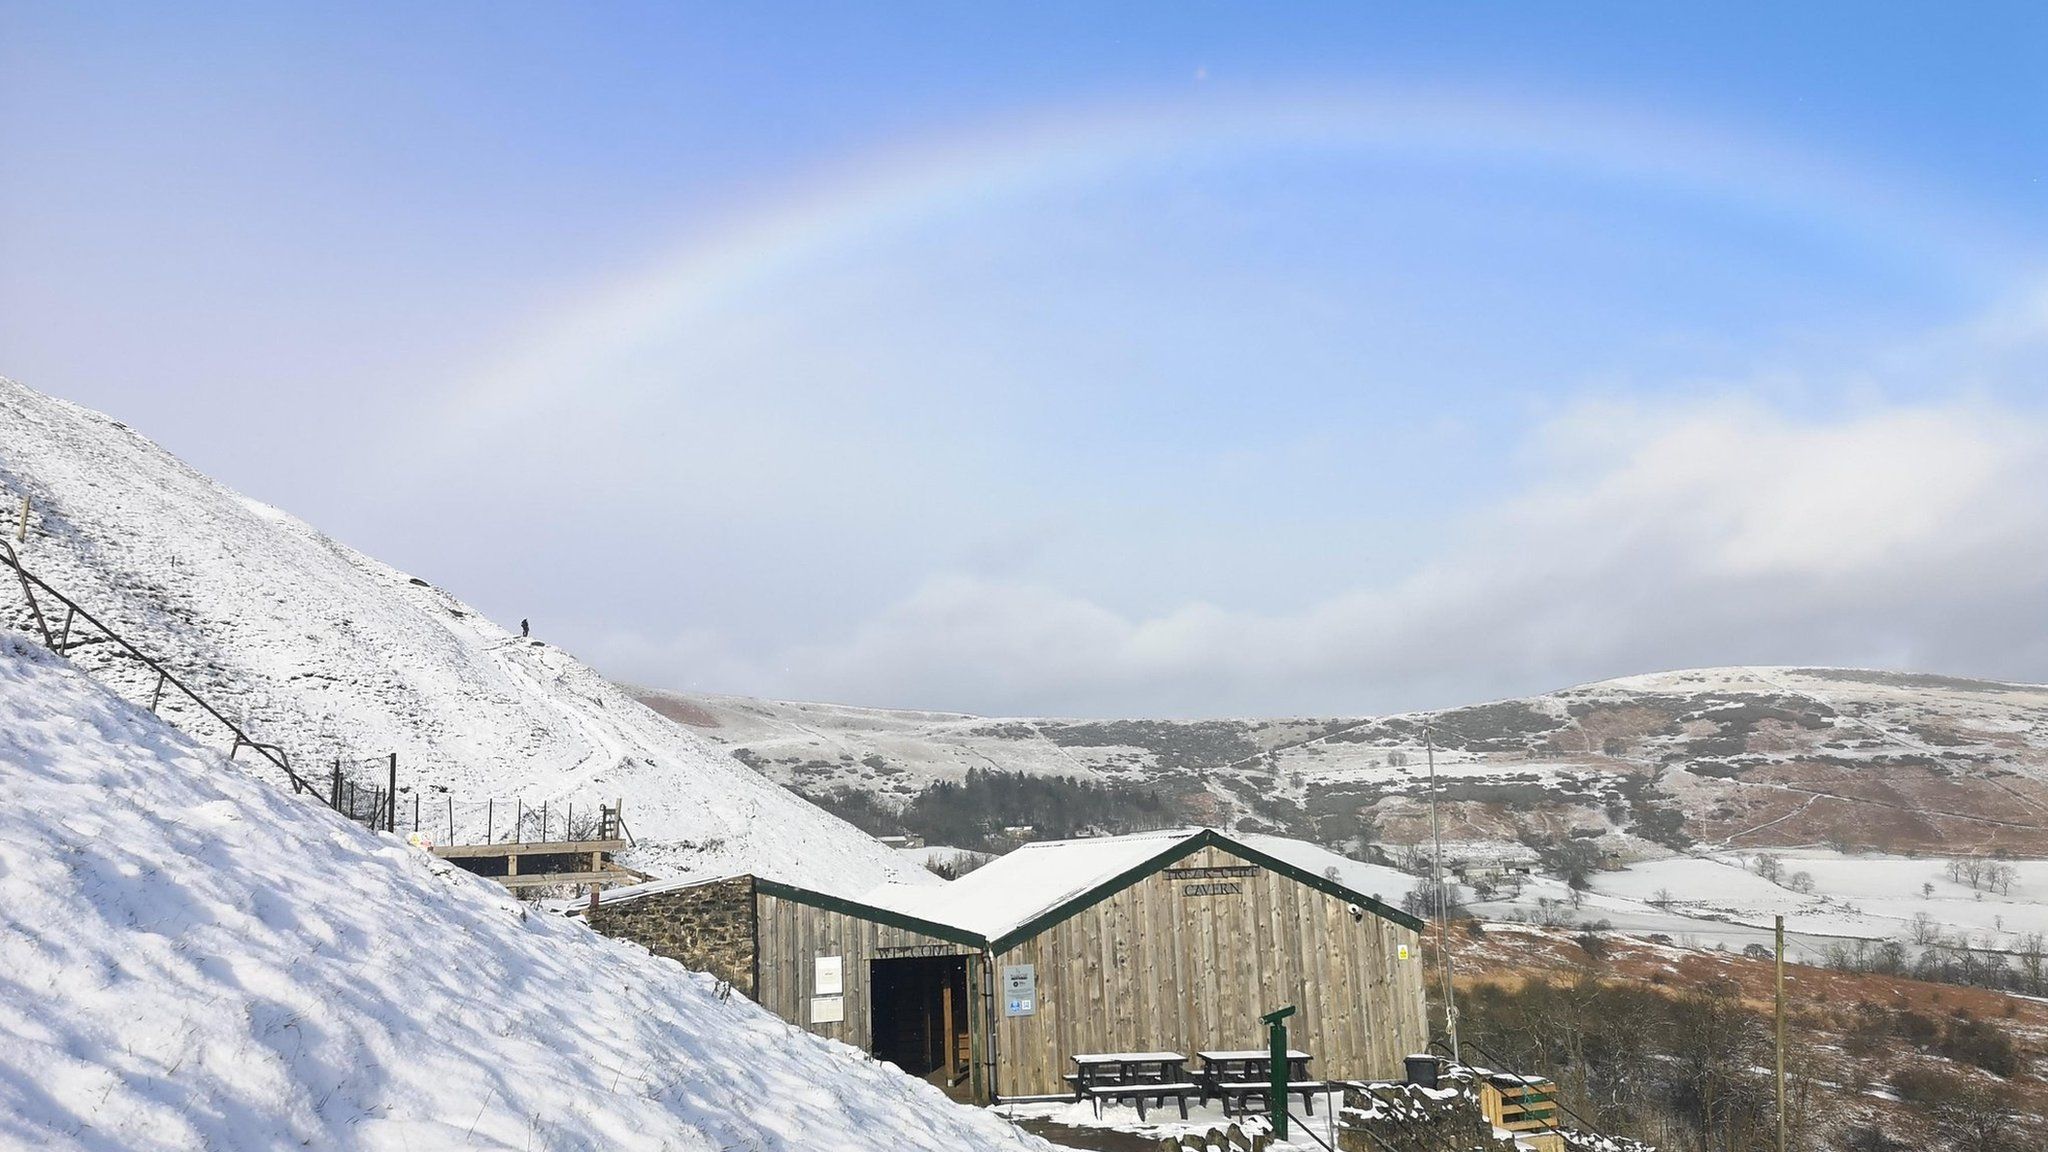 'I'm really chuffed to have seen a snowbow'